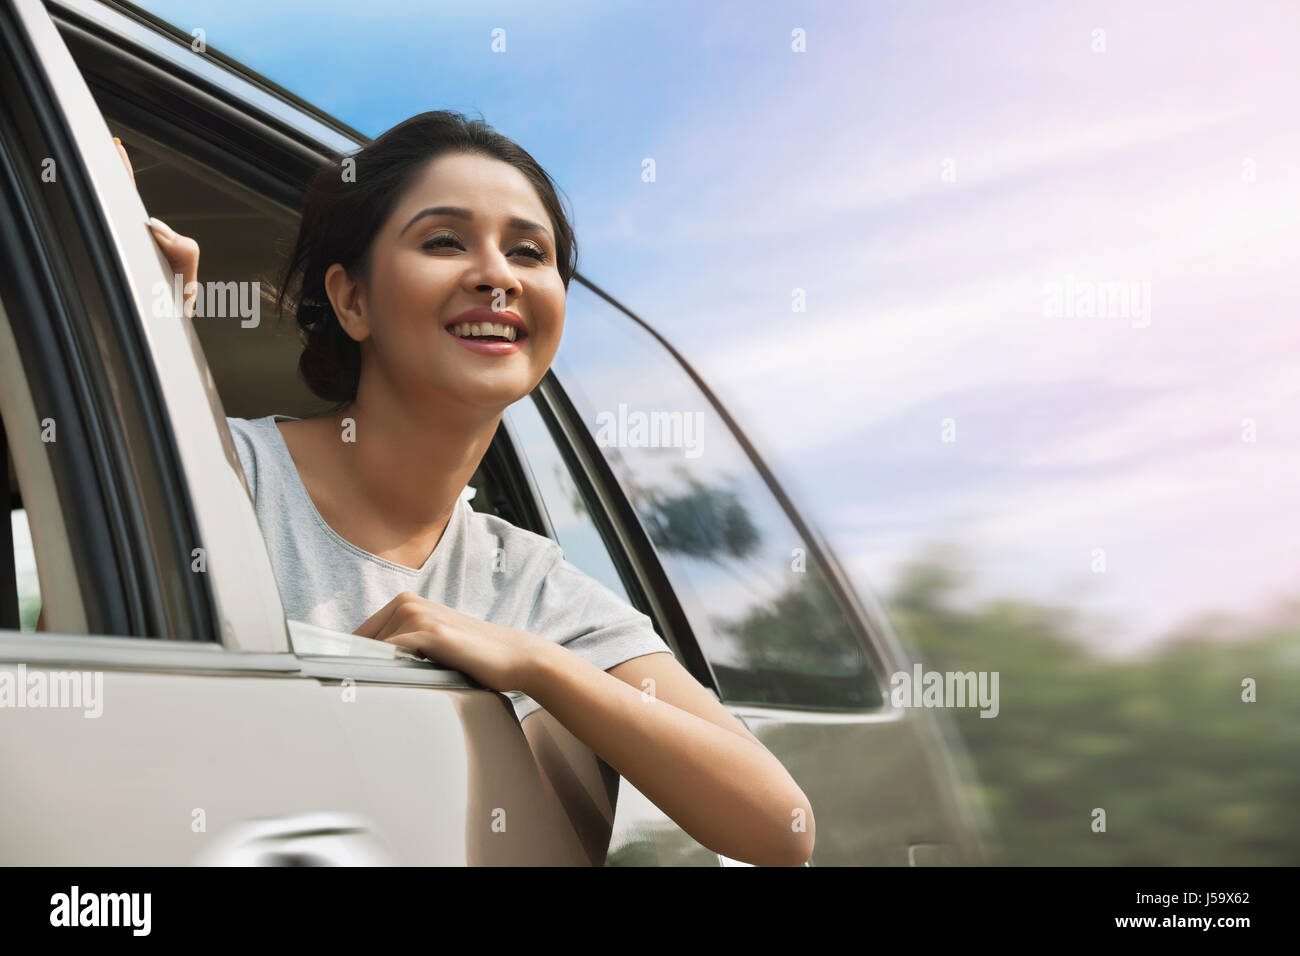 Smiling young woman peeking from car window Banque D'Images